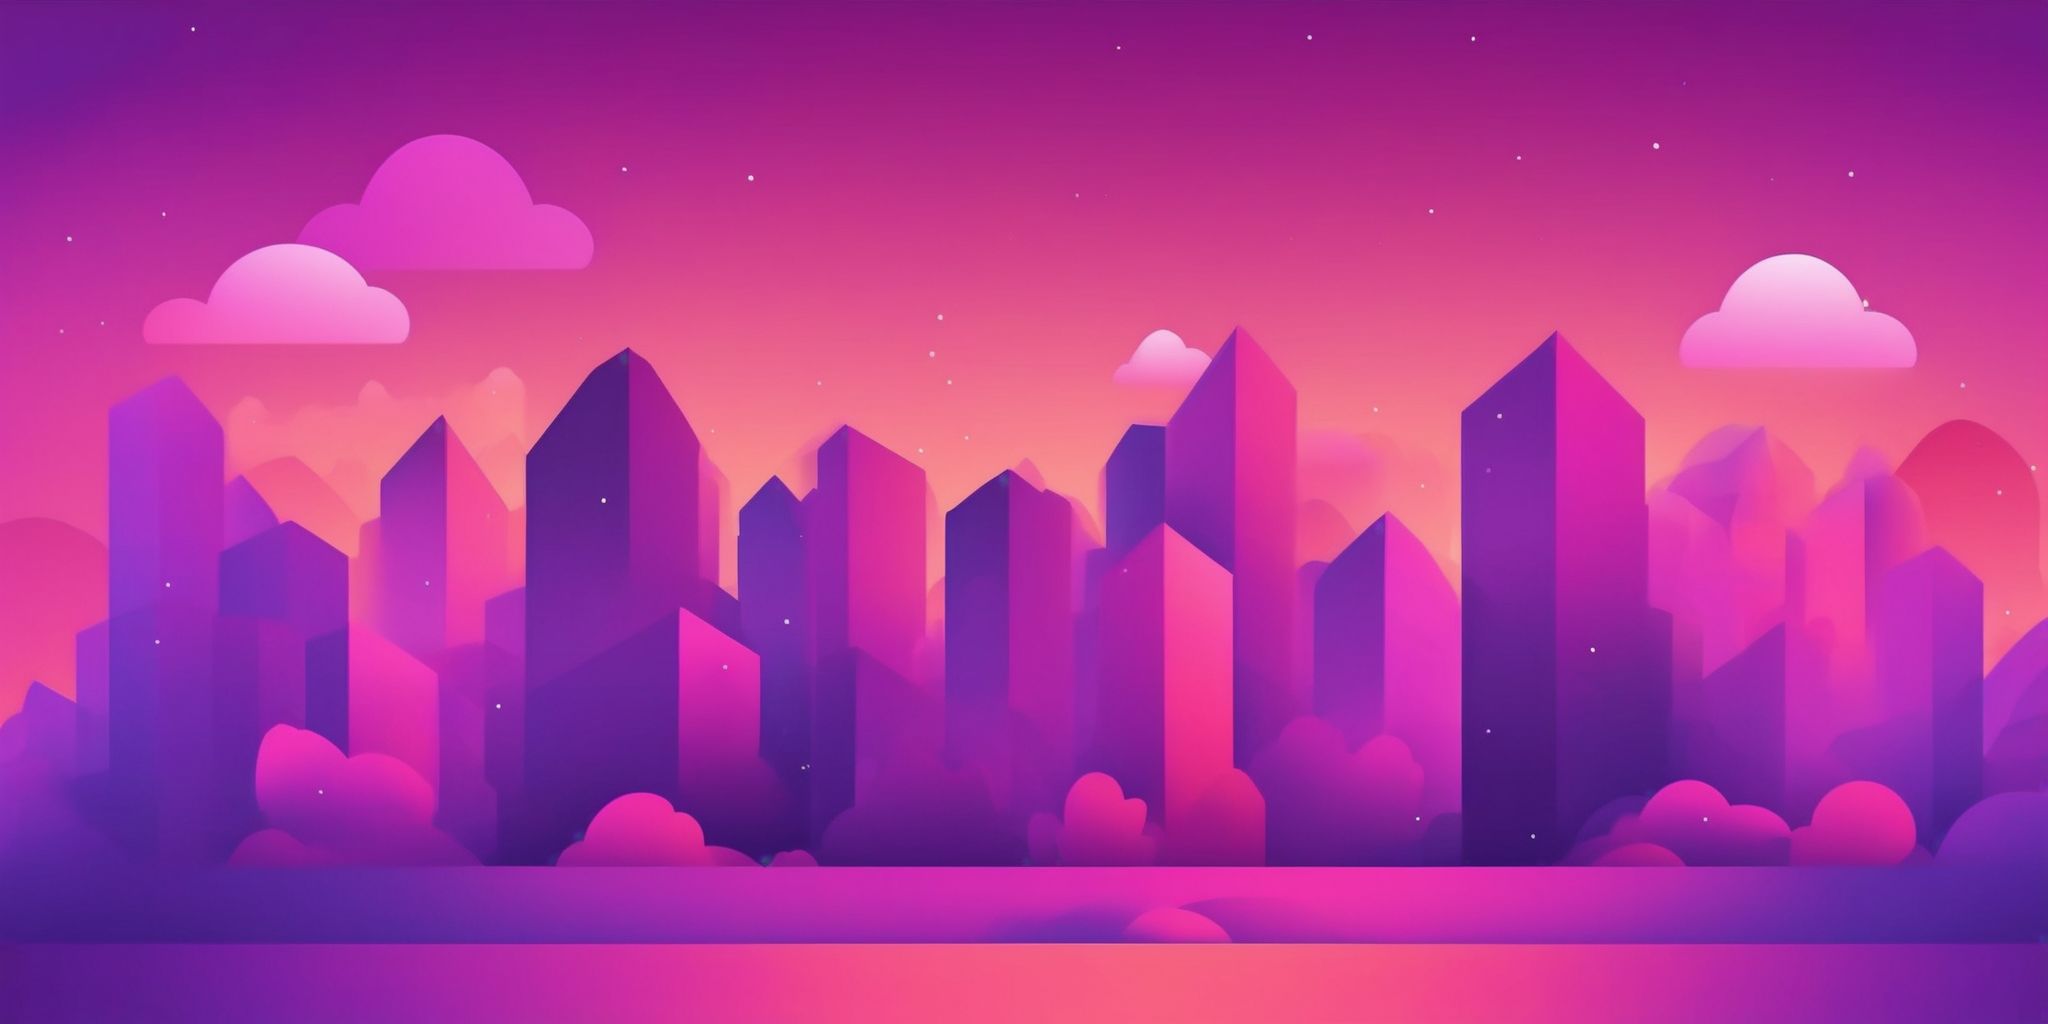 Box in flat illustration style, colorful purple gradient colors